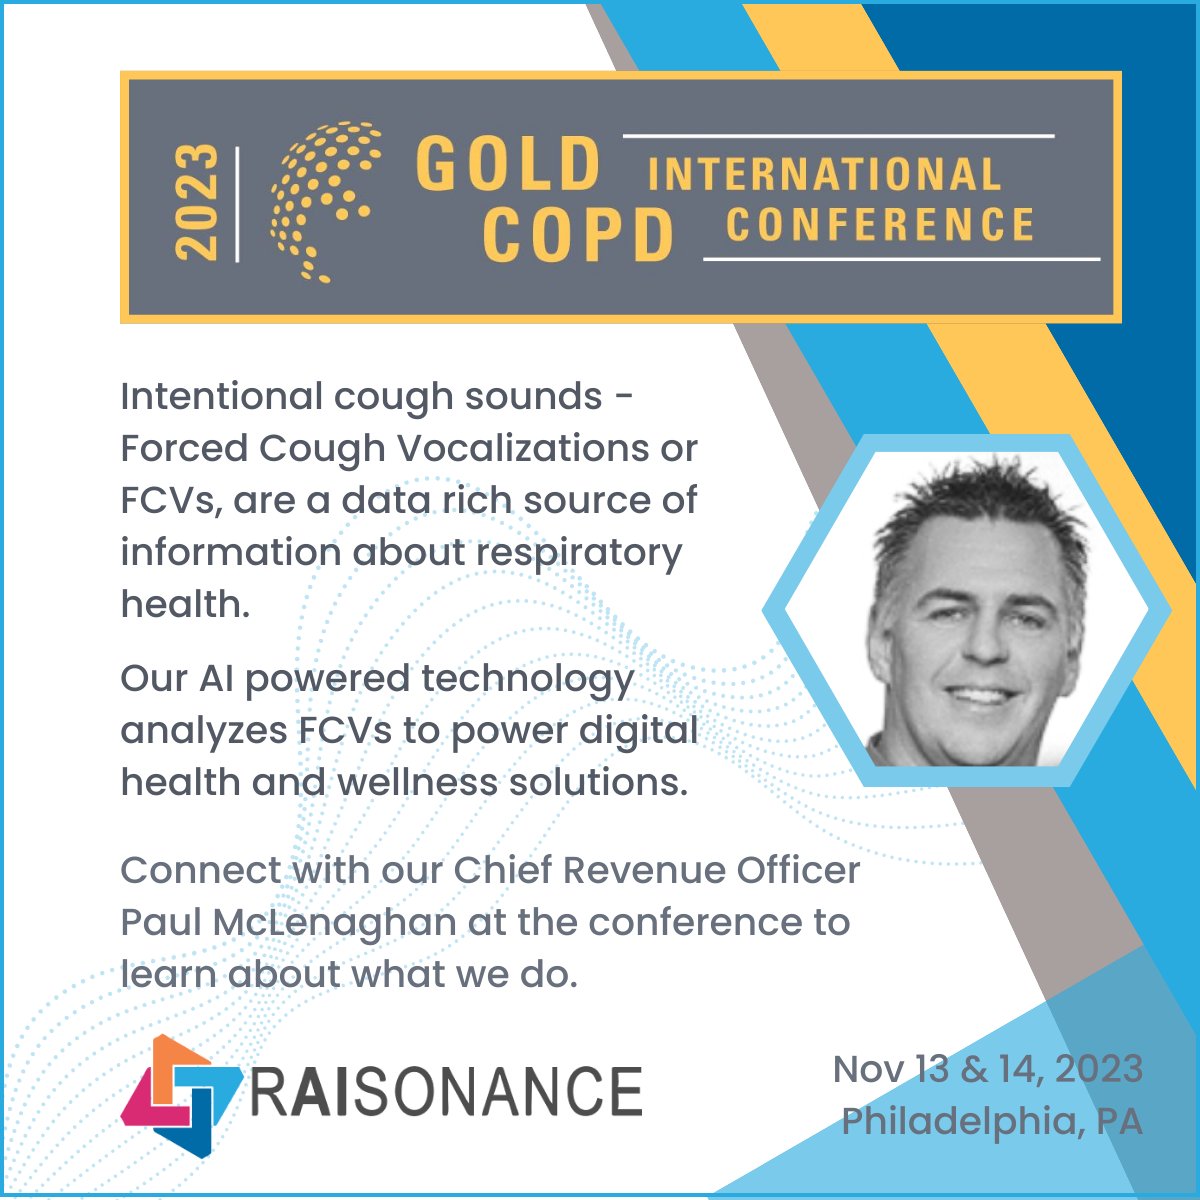 Our CRO Paul McLenaghan will be at #copdgold2023, will you? Reach out and arrange to meet him - sales@raisonance.ai. Let us tell you more. GoldCOPDConference.com #digitalhealth #remotehealthcare   #MobileHealth  #respiratory